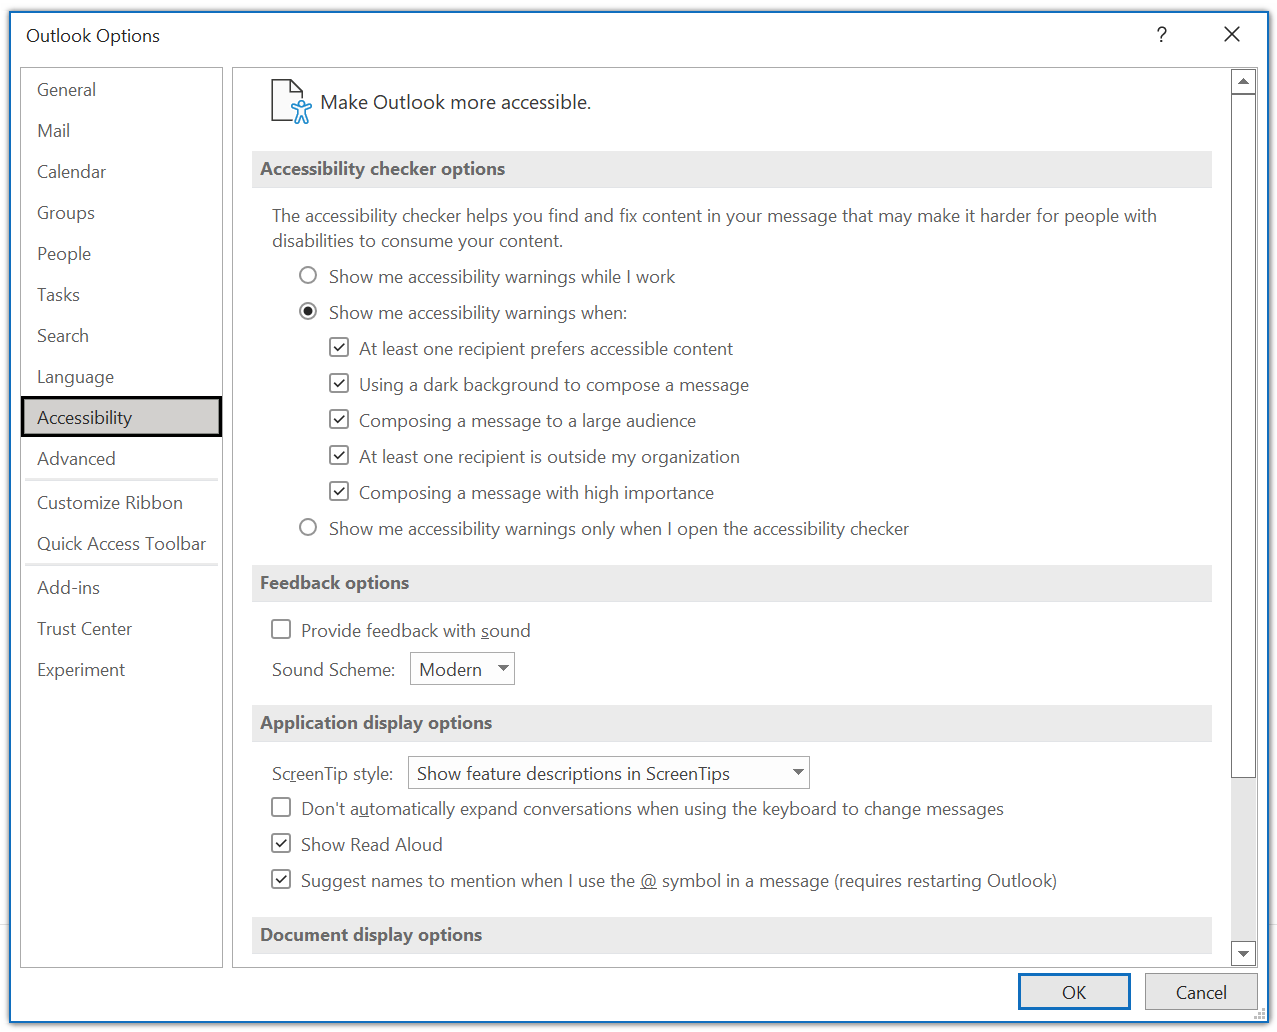 Outlook Options dialog box with Accessibility section selected